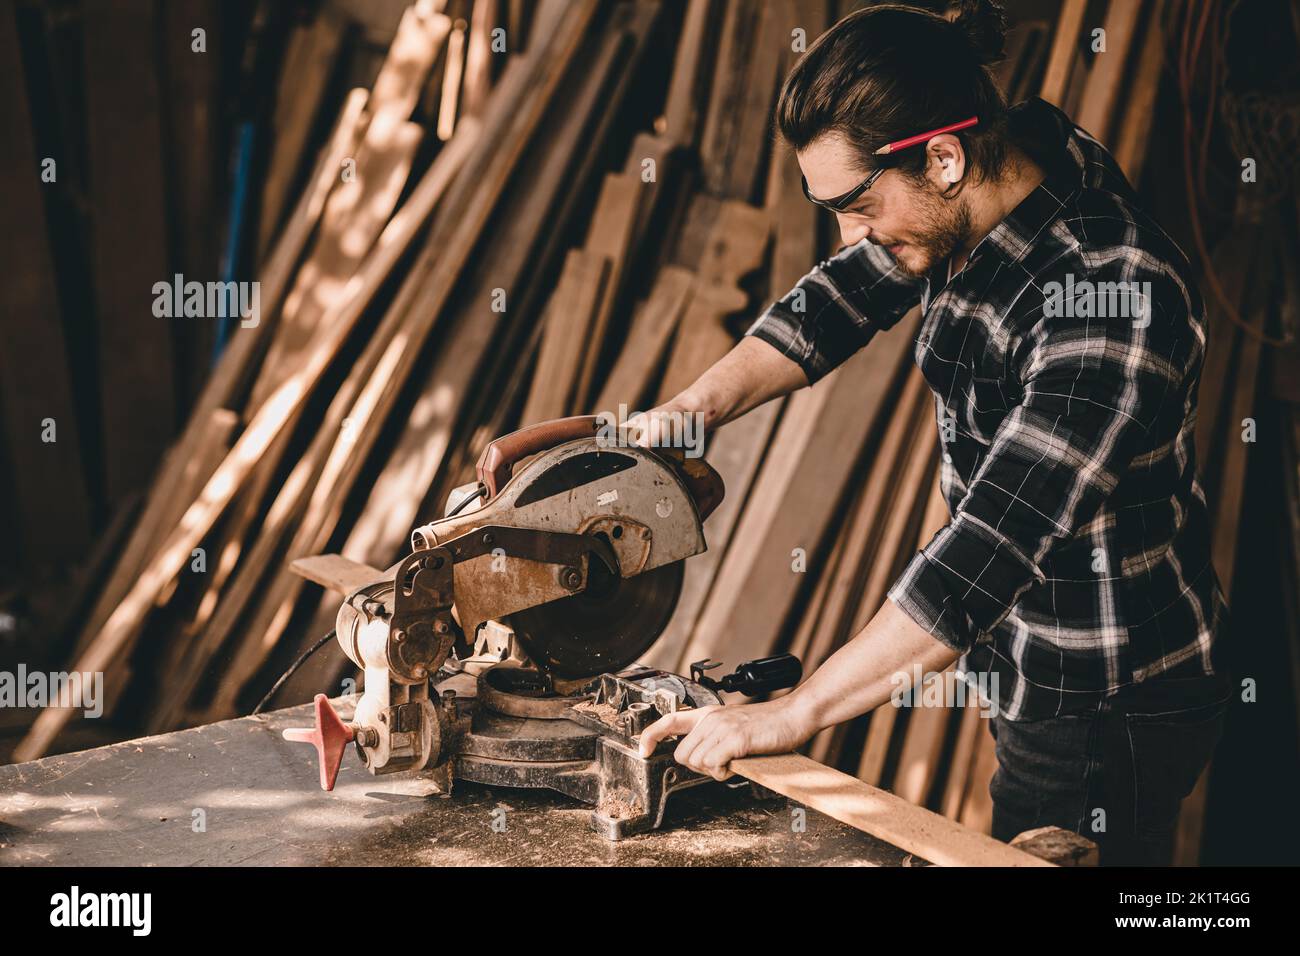 Professional Carpenter man authentic Handcraft  Wood worker. Joiner or furniture builder home diy projects maker male. Stock Photo